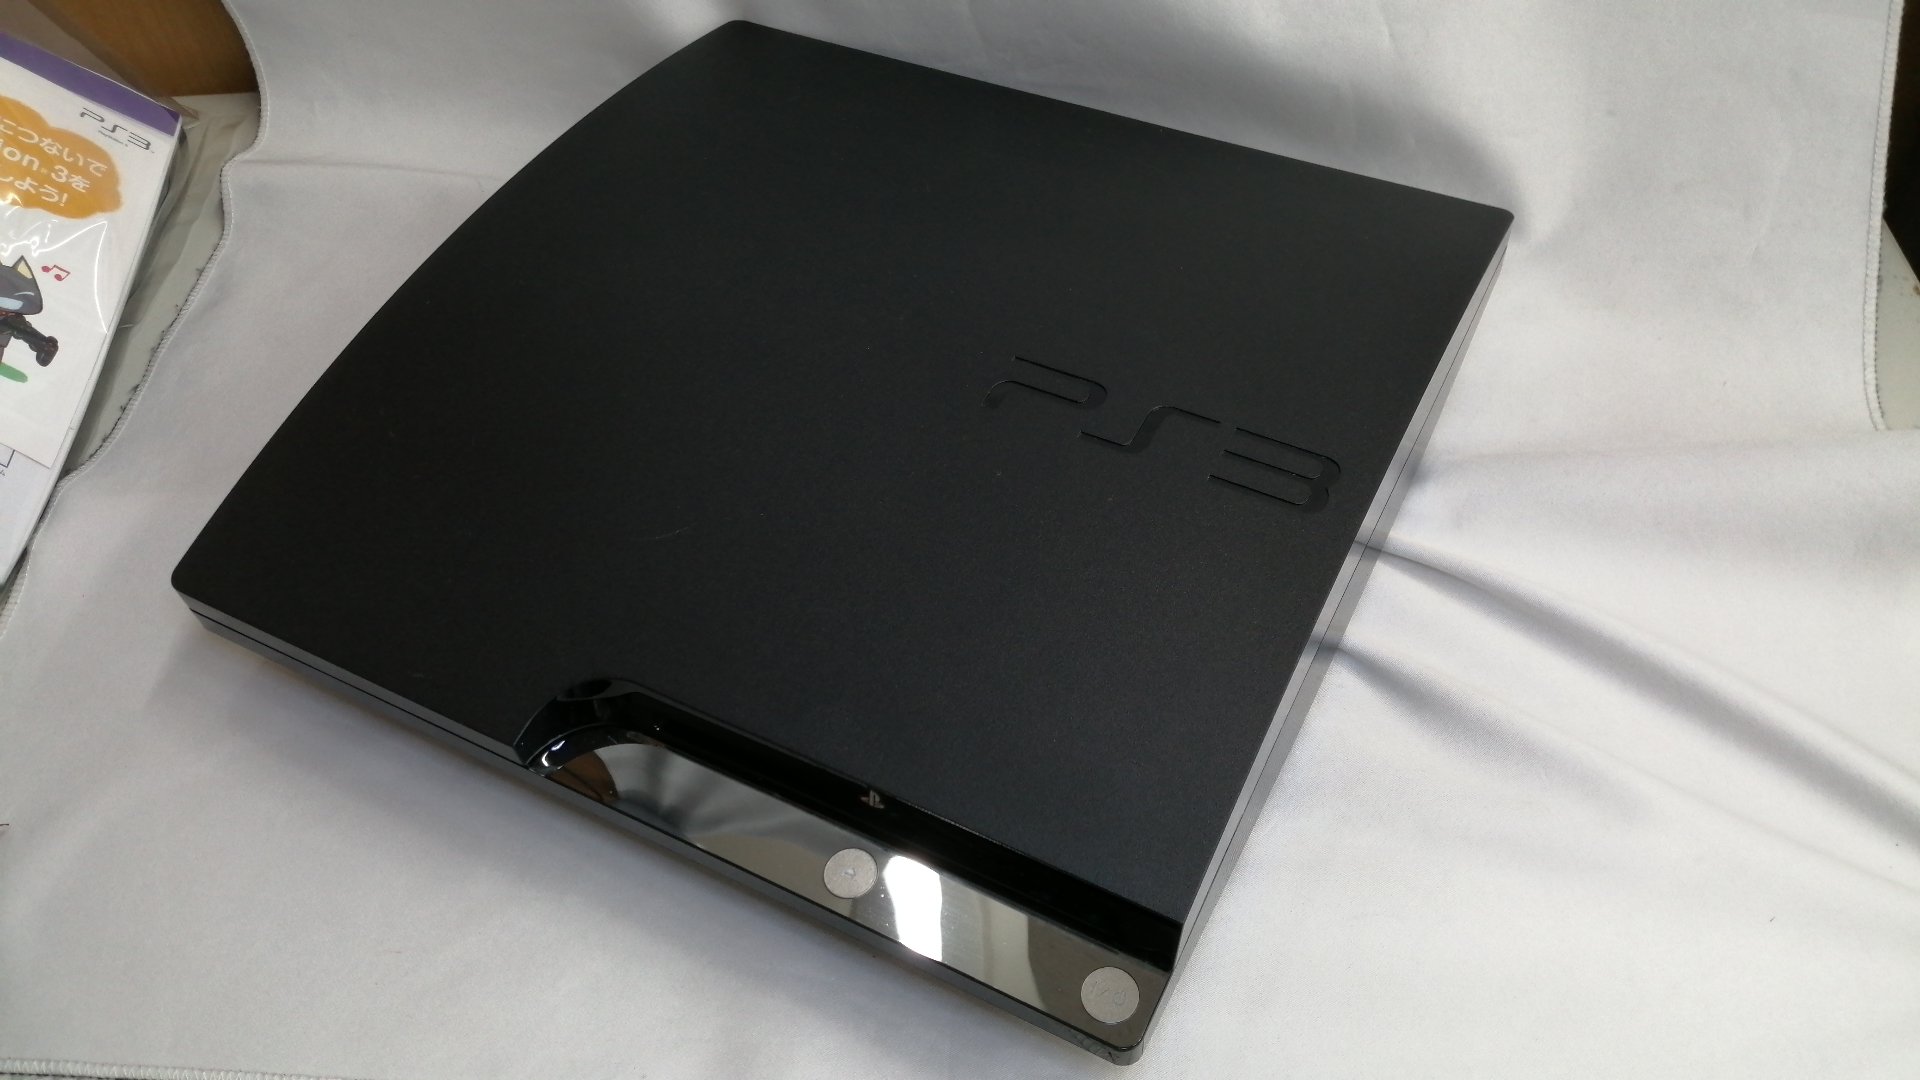 Buy PS3 SONY CECH-2500B game console body from Japan - Buy